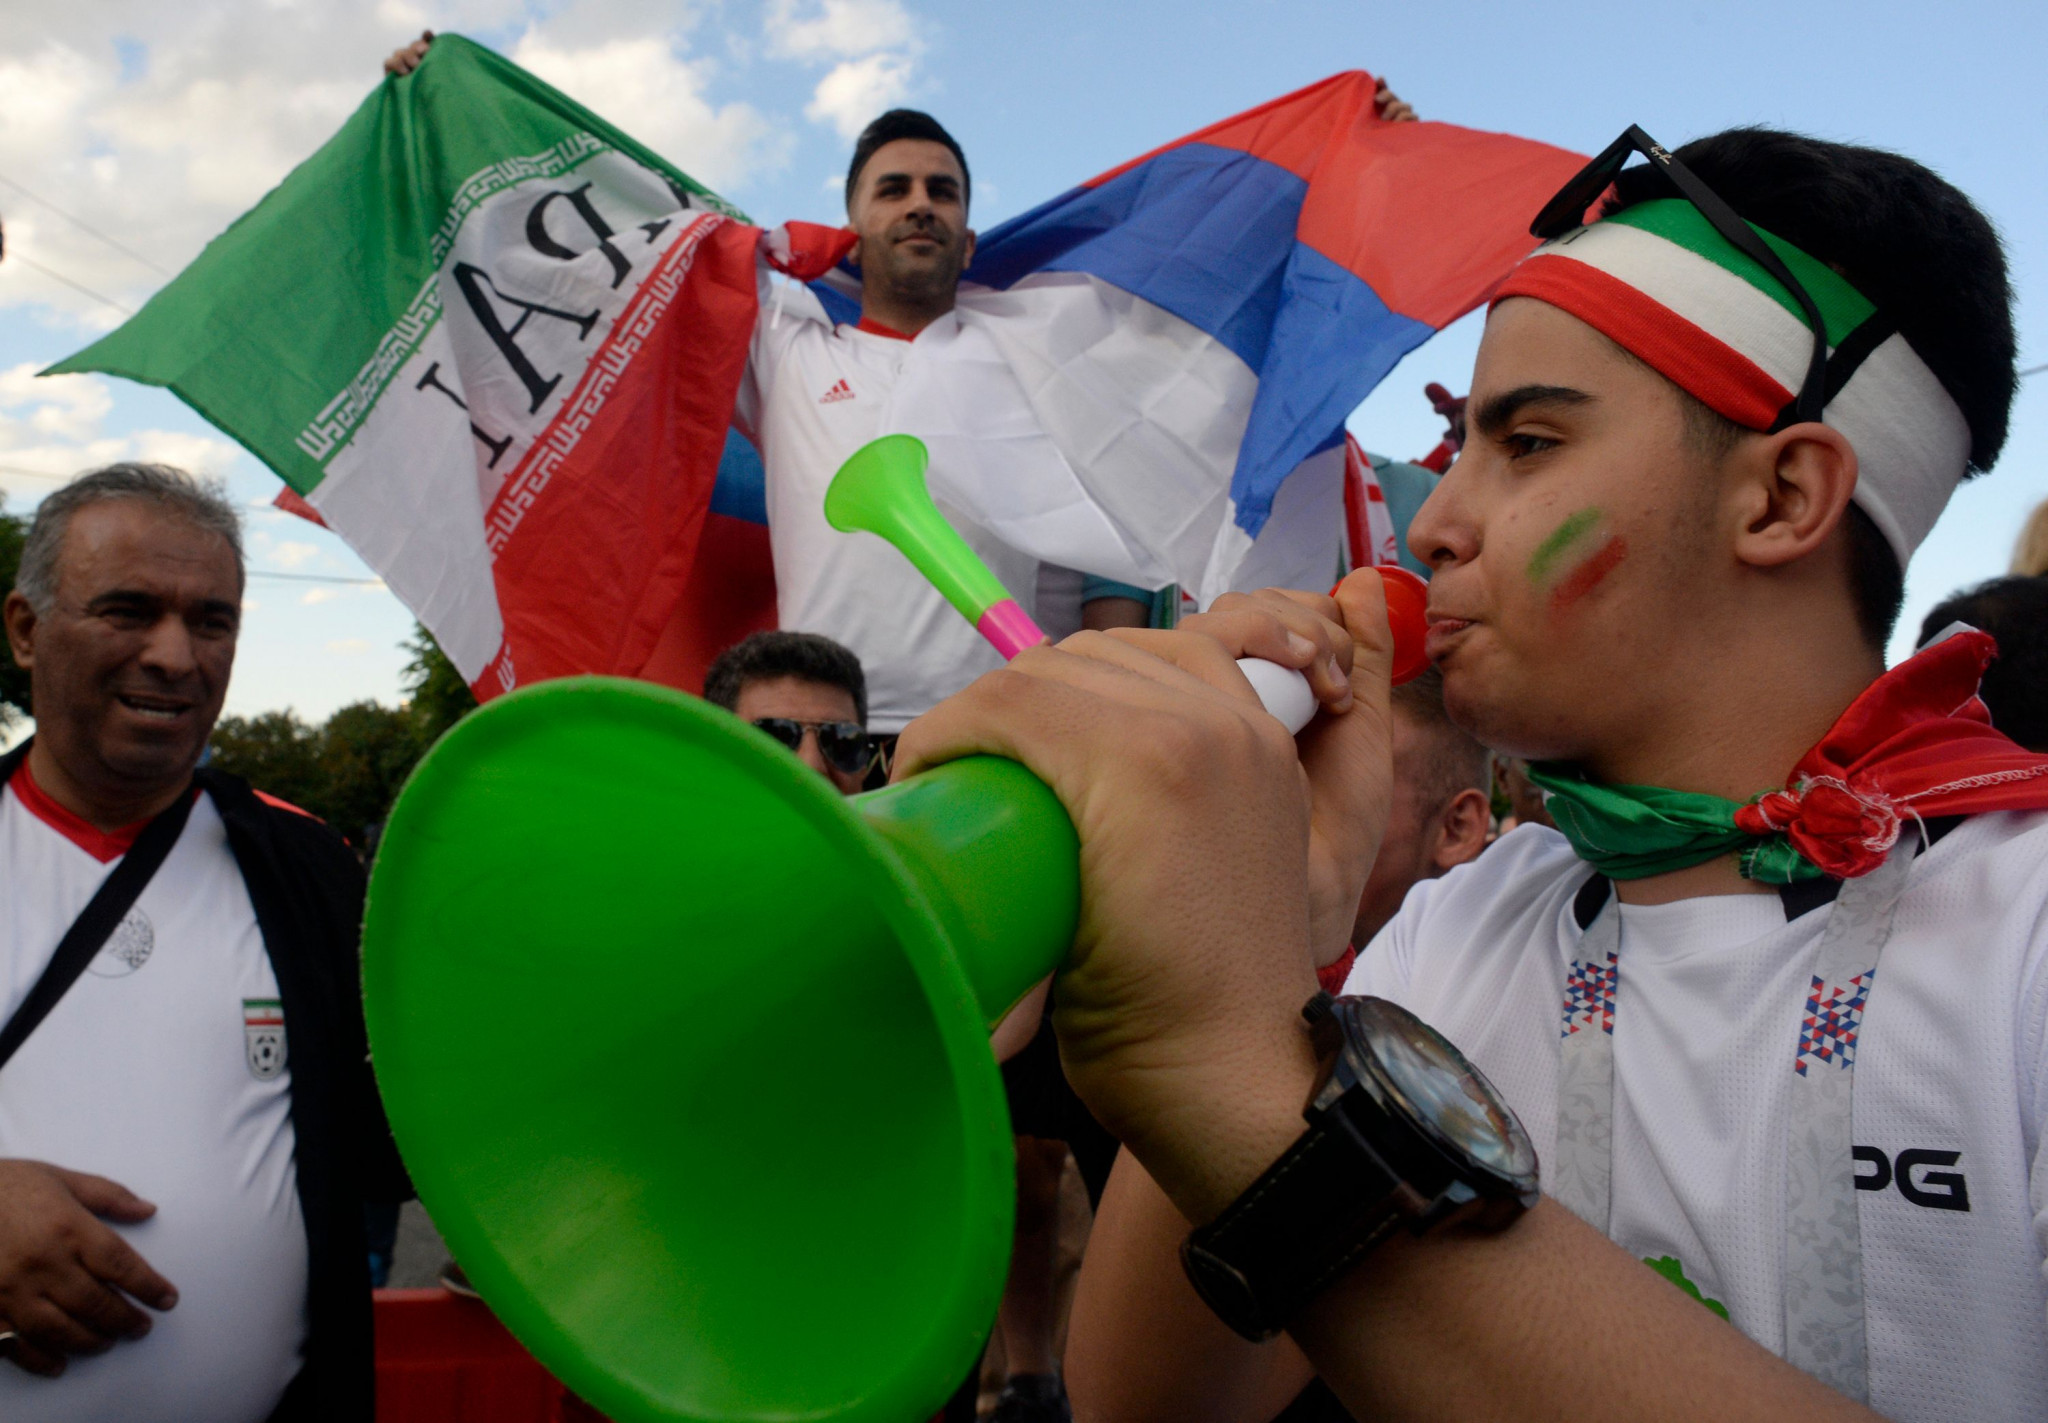 Iran supporters pictured at a Fans Fest in Saint Petersburg ©Getty Images